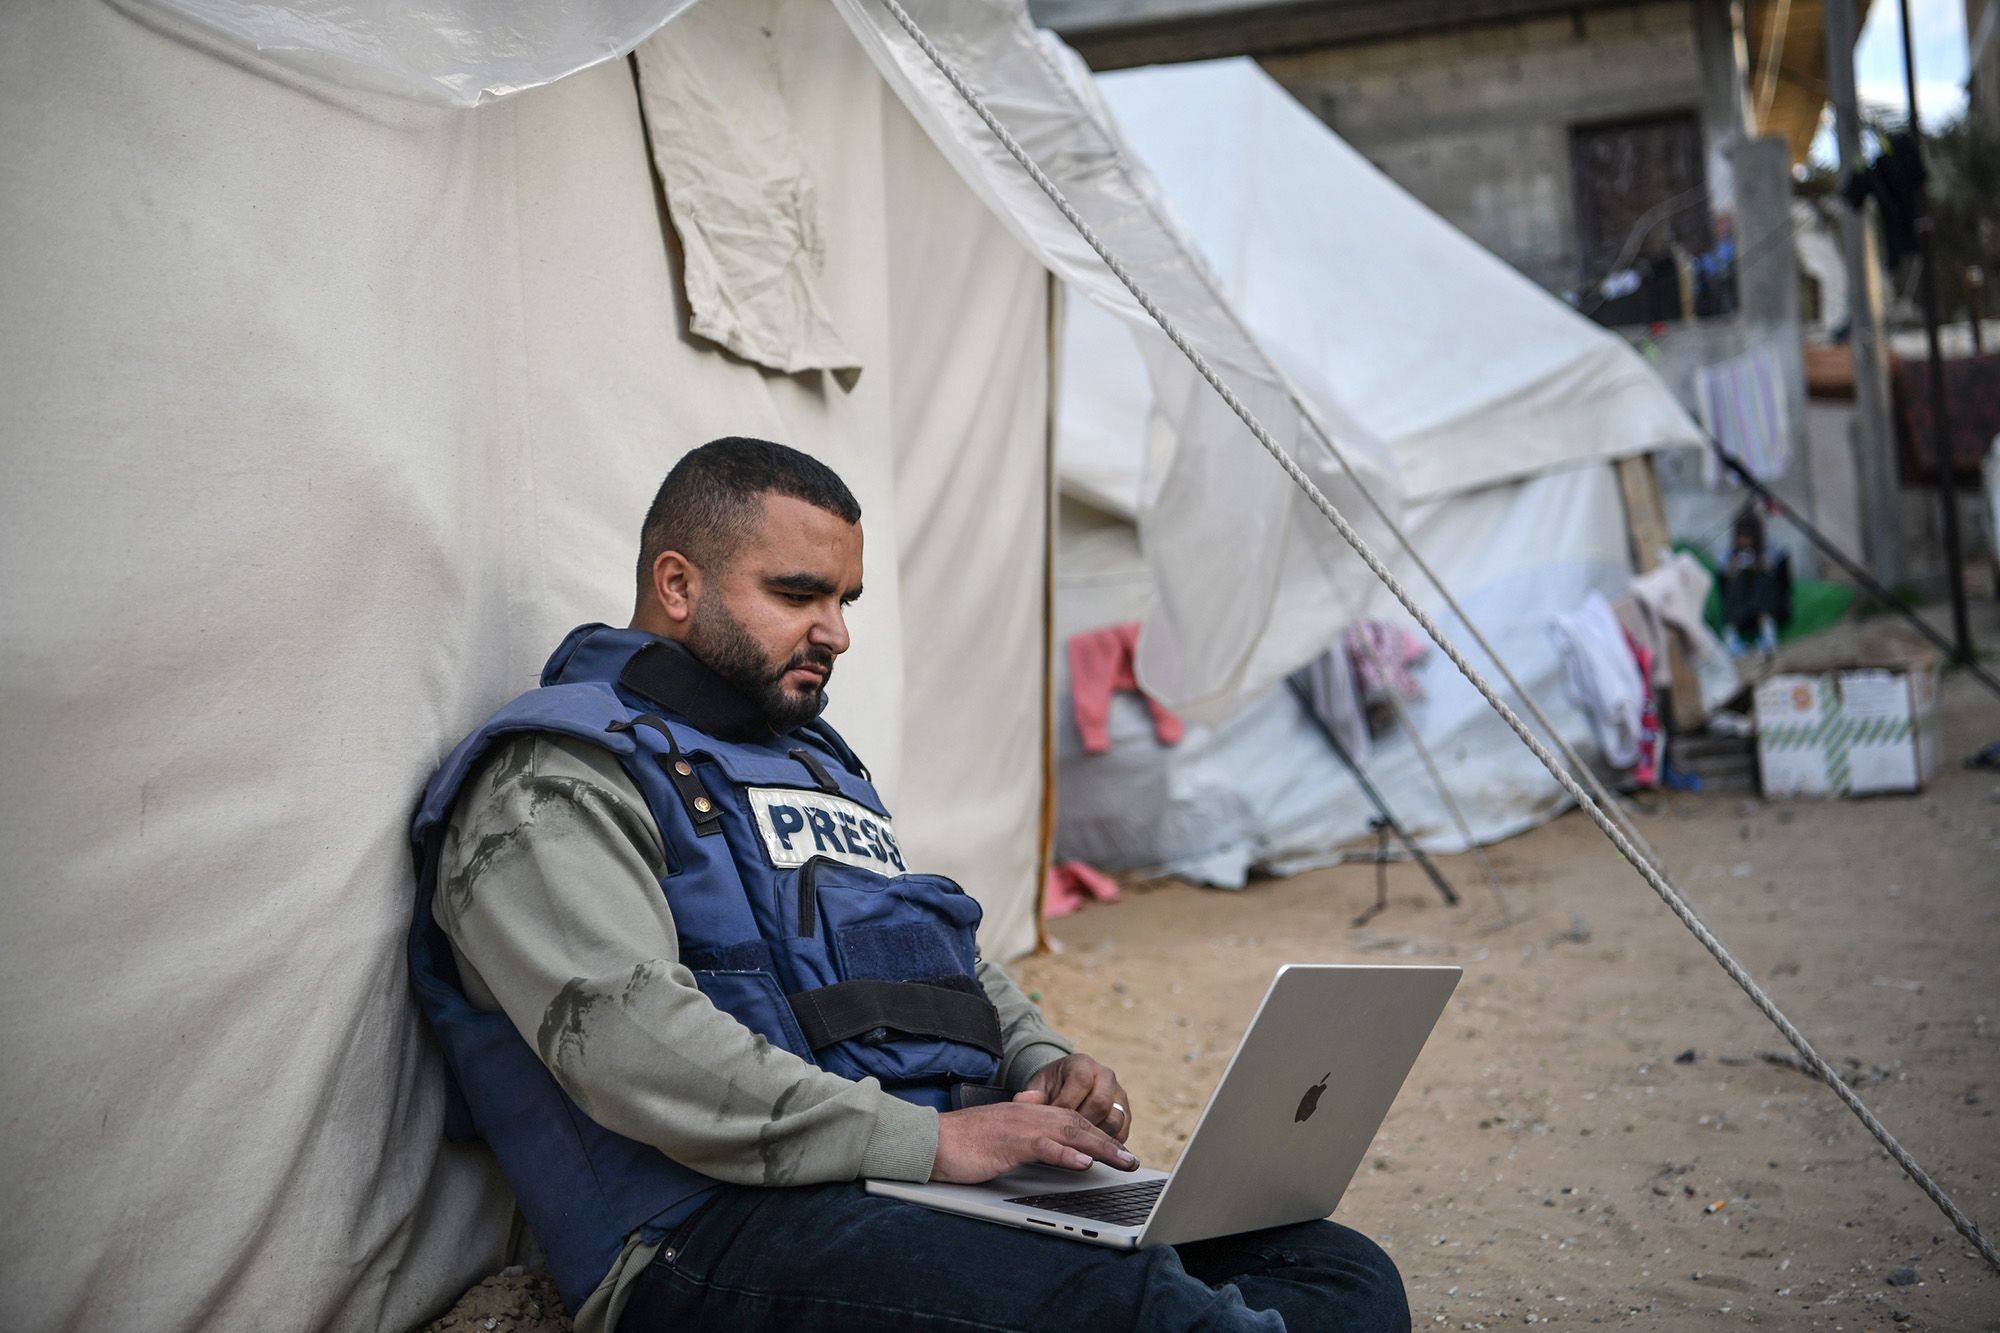 A press member is seen sitting next to a tent as he tries to connect to the internet in Rafah, Gaza, on January 14.